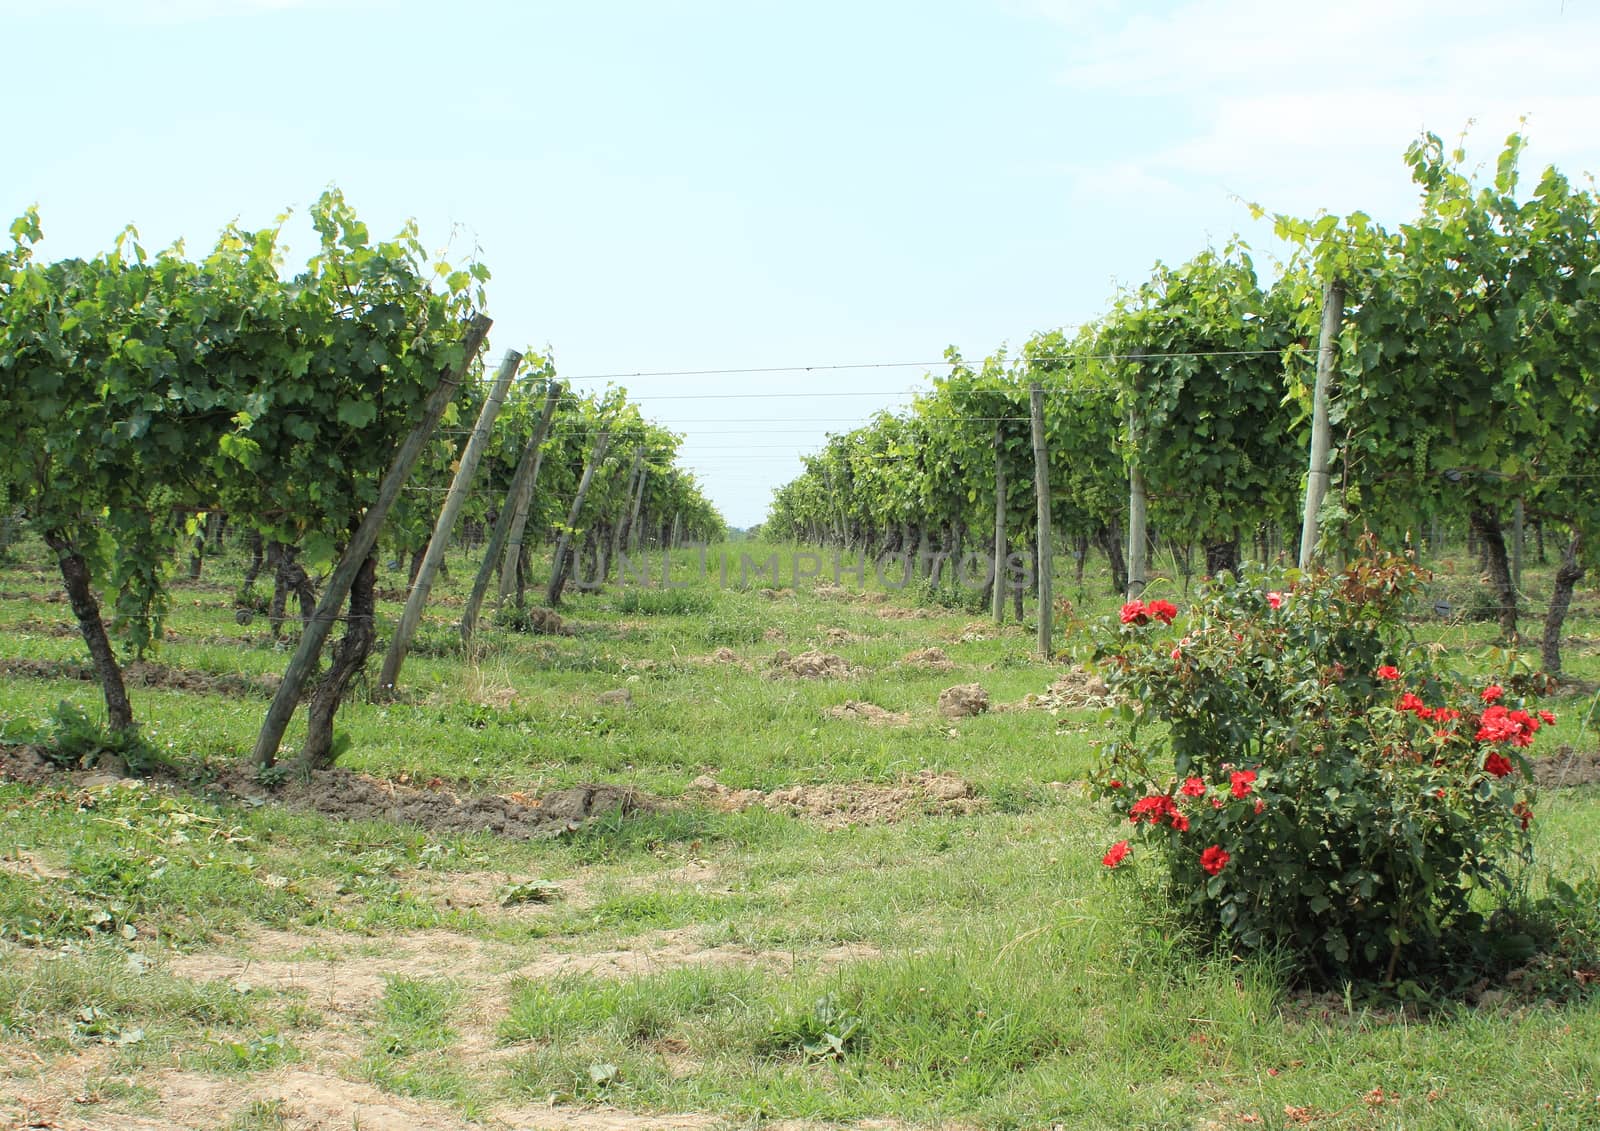 Passage between rows of wine stock at vineyard with roses